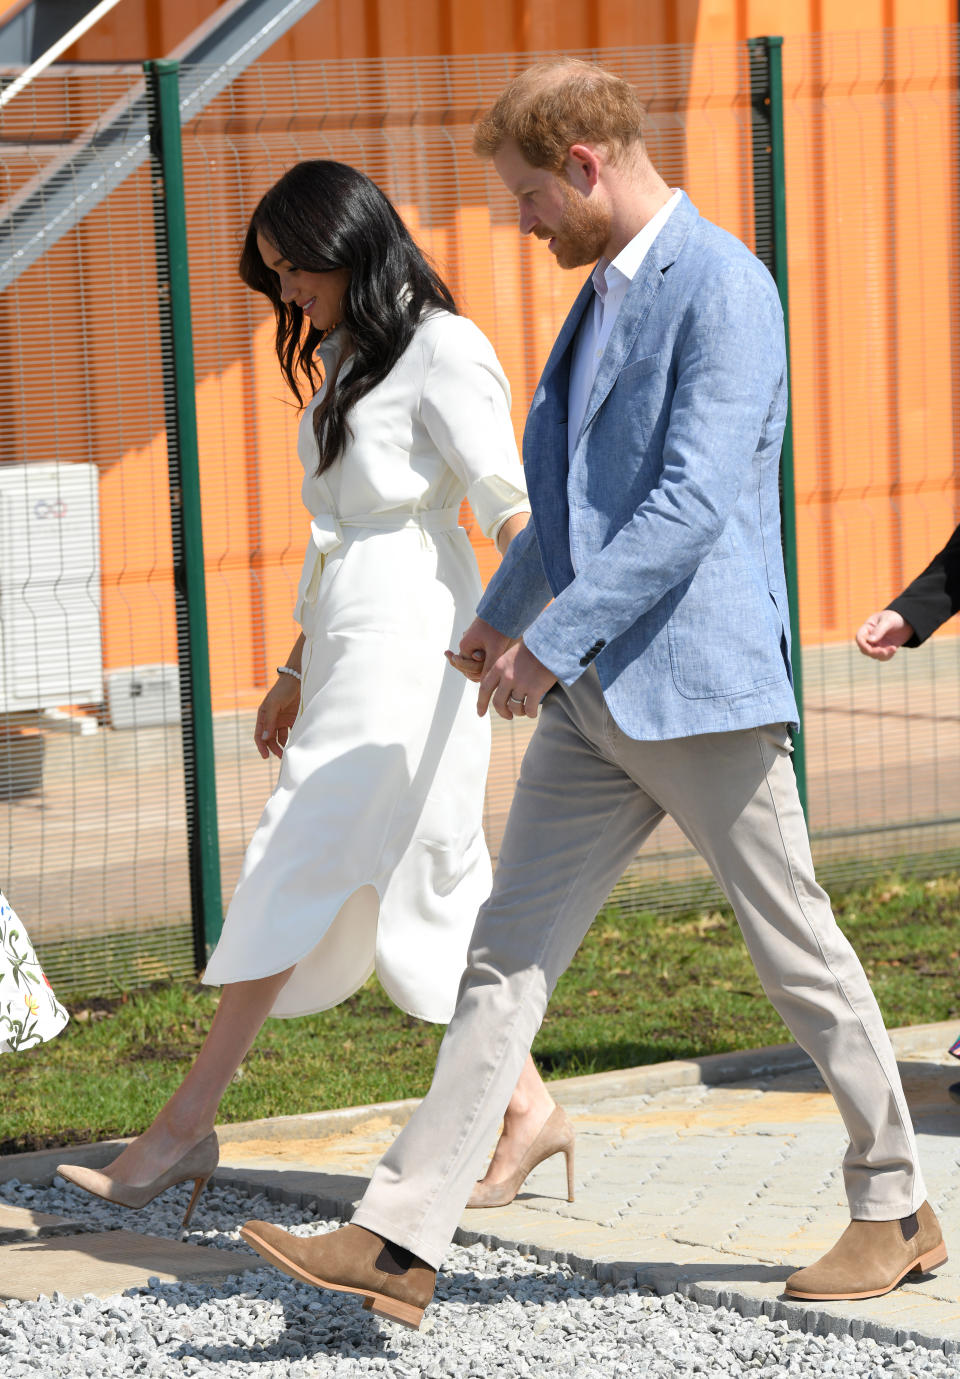 JOHANNESBURG, SOUTH AFRICA - OCTOBER 02: Prince Harry, Duke of Sussex and Meghan, Duchess of Sussex visit the Tembisa Township to learn about Youth Employment Services on October 02, 2019 in Tembisa, South Africa.  (Photo by Karwai Tang/WireImage)